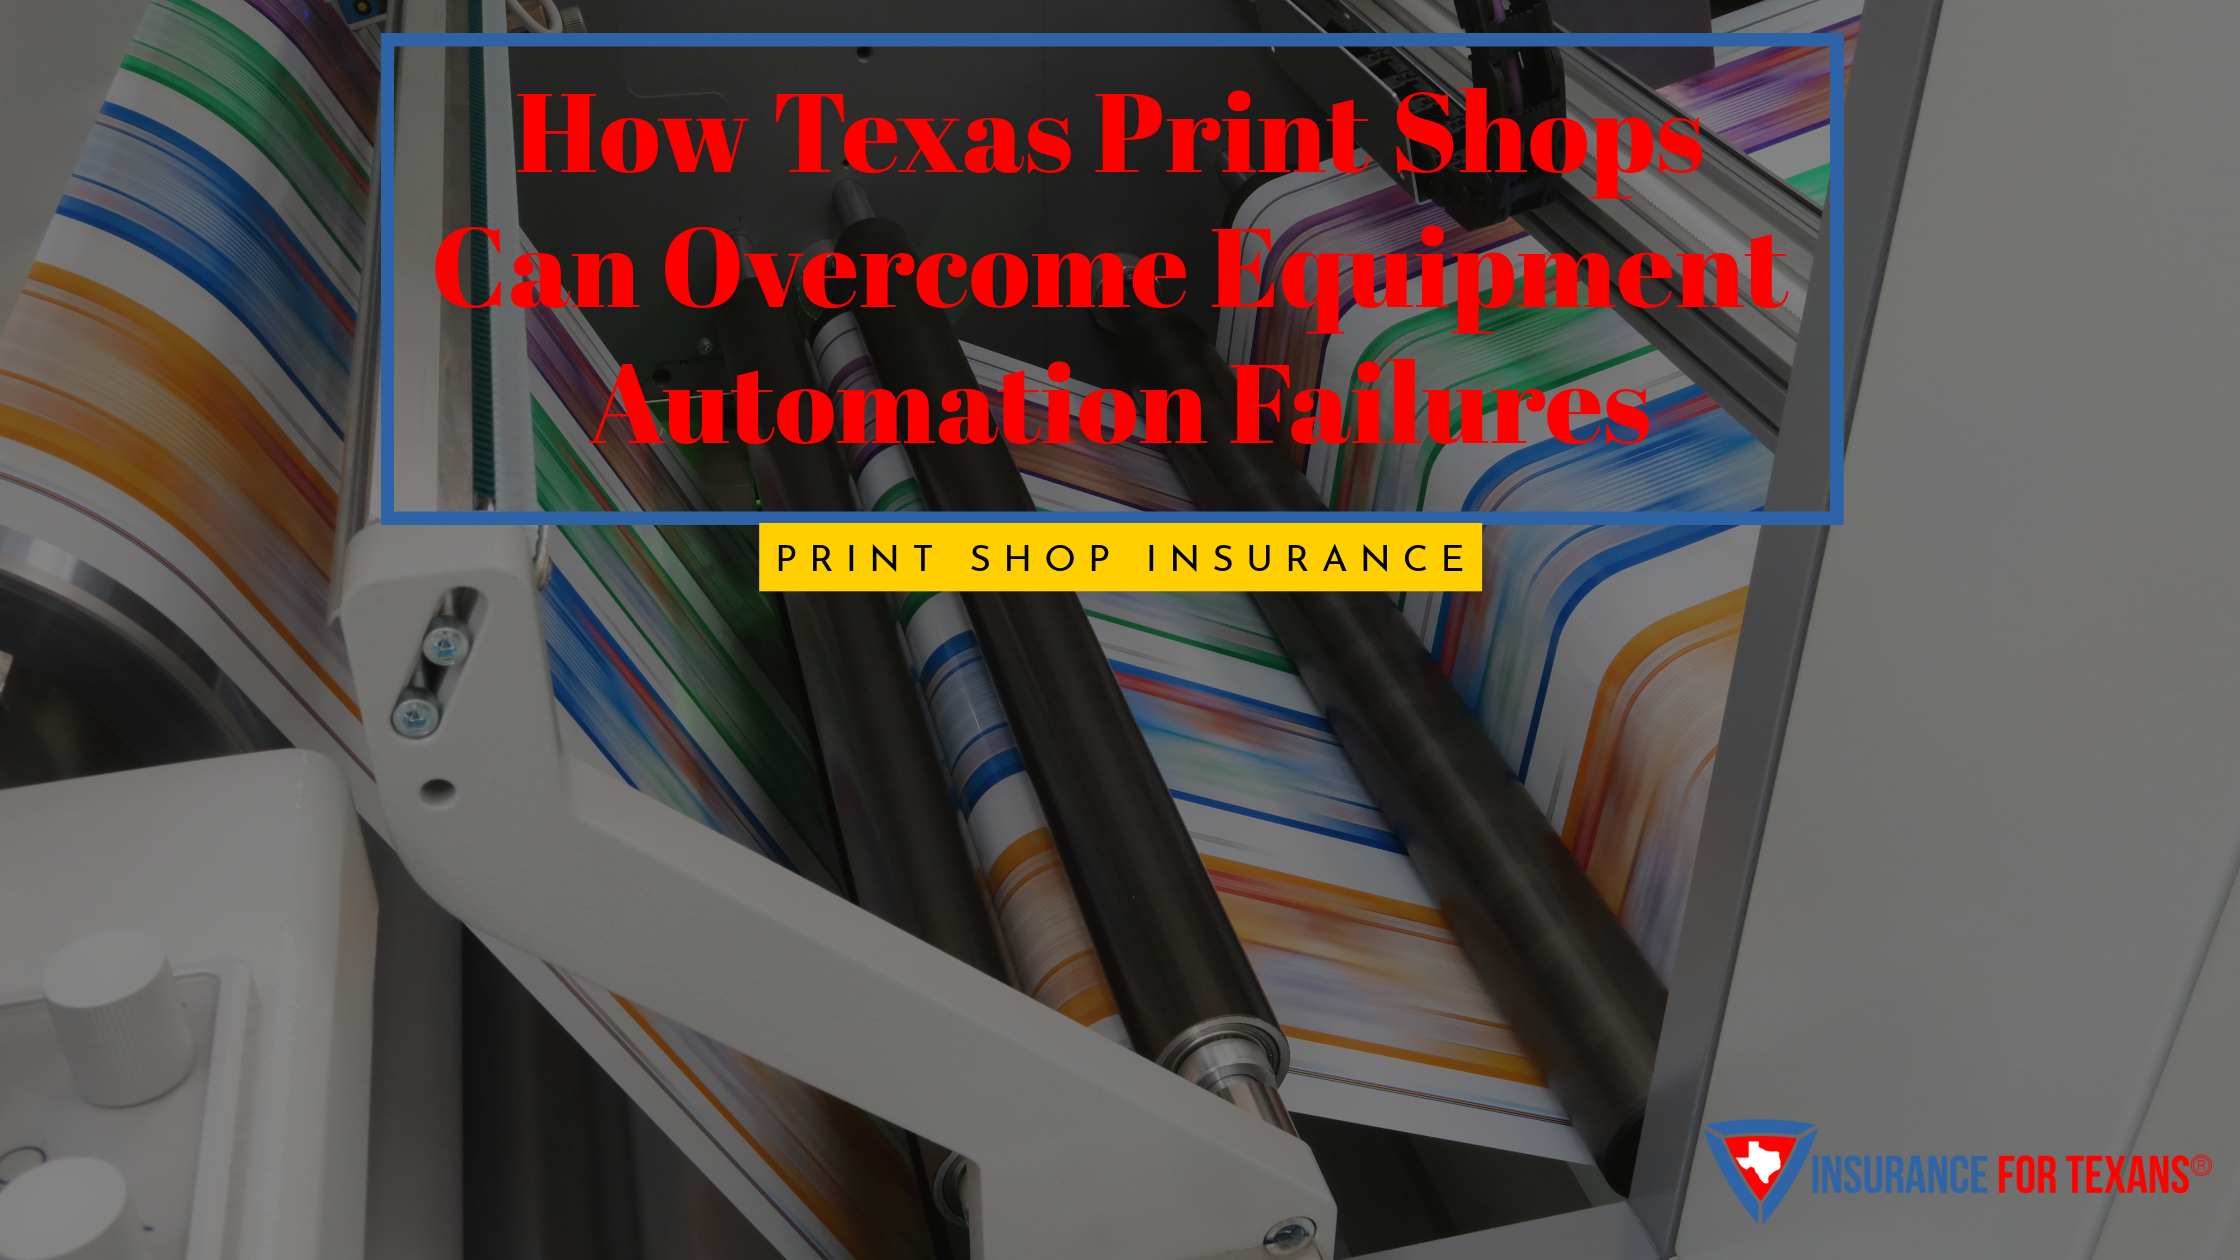 How Texas Print Shops Can Overcome Equipment Automation Failures